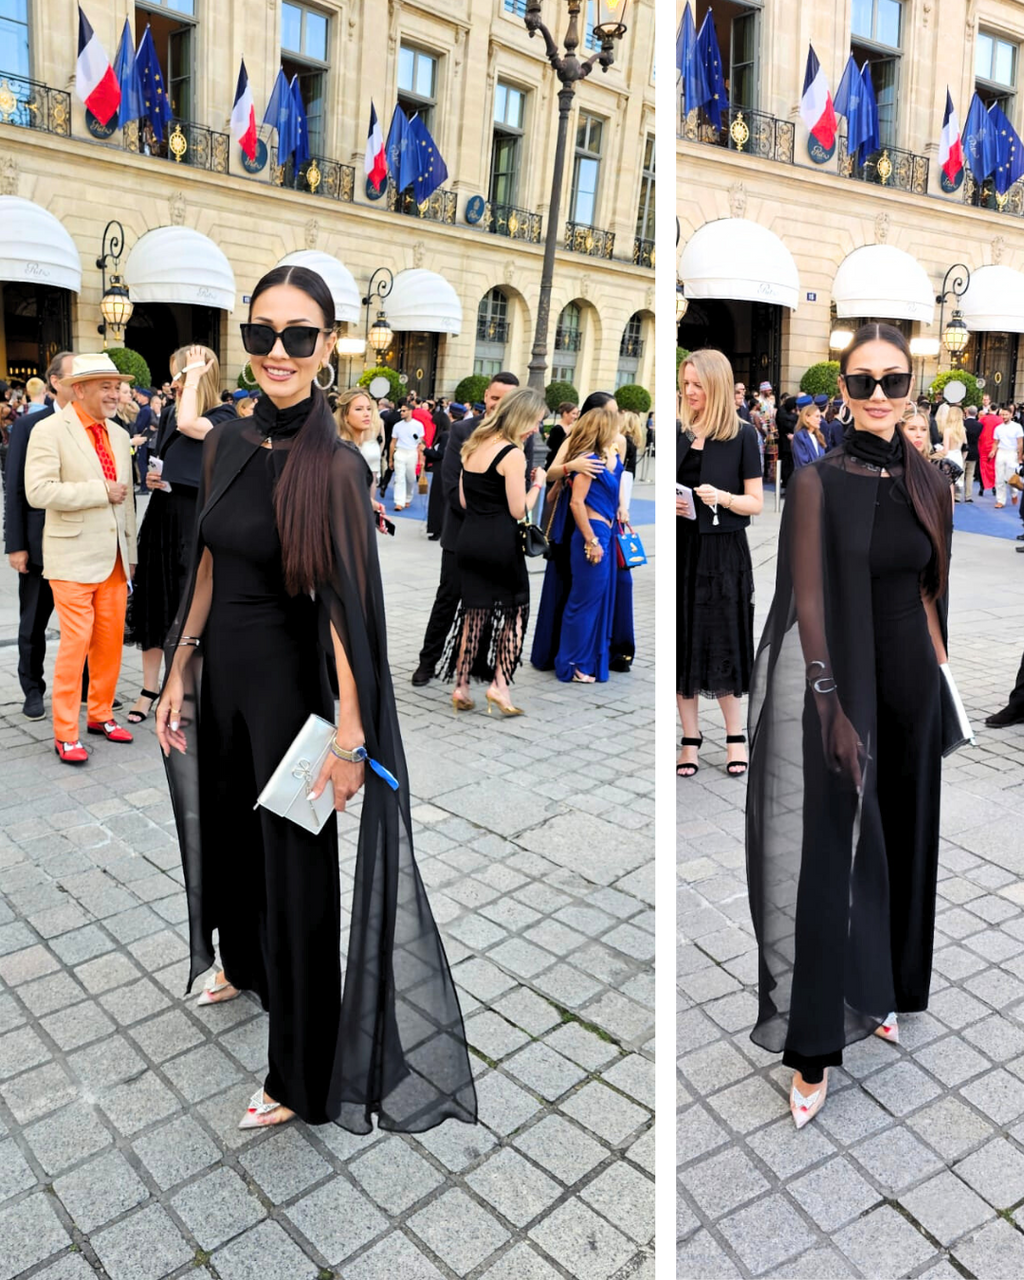 Vogue World Event at Place Vendôme: A Spectacular Fusion of Fashion and Sport